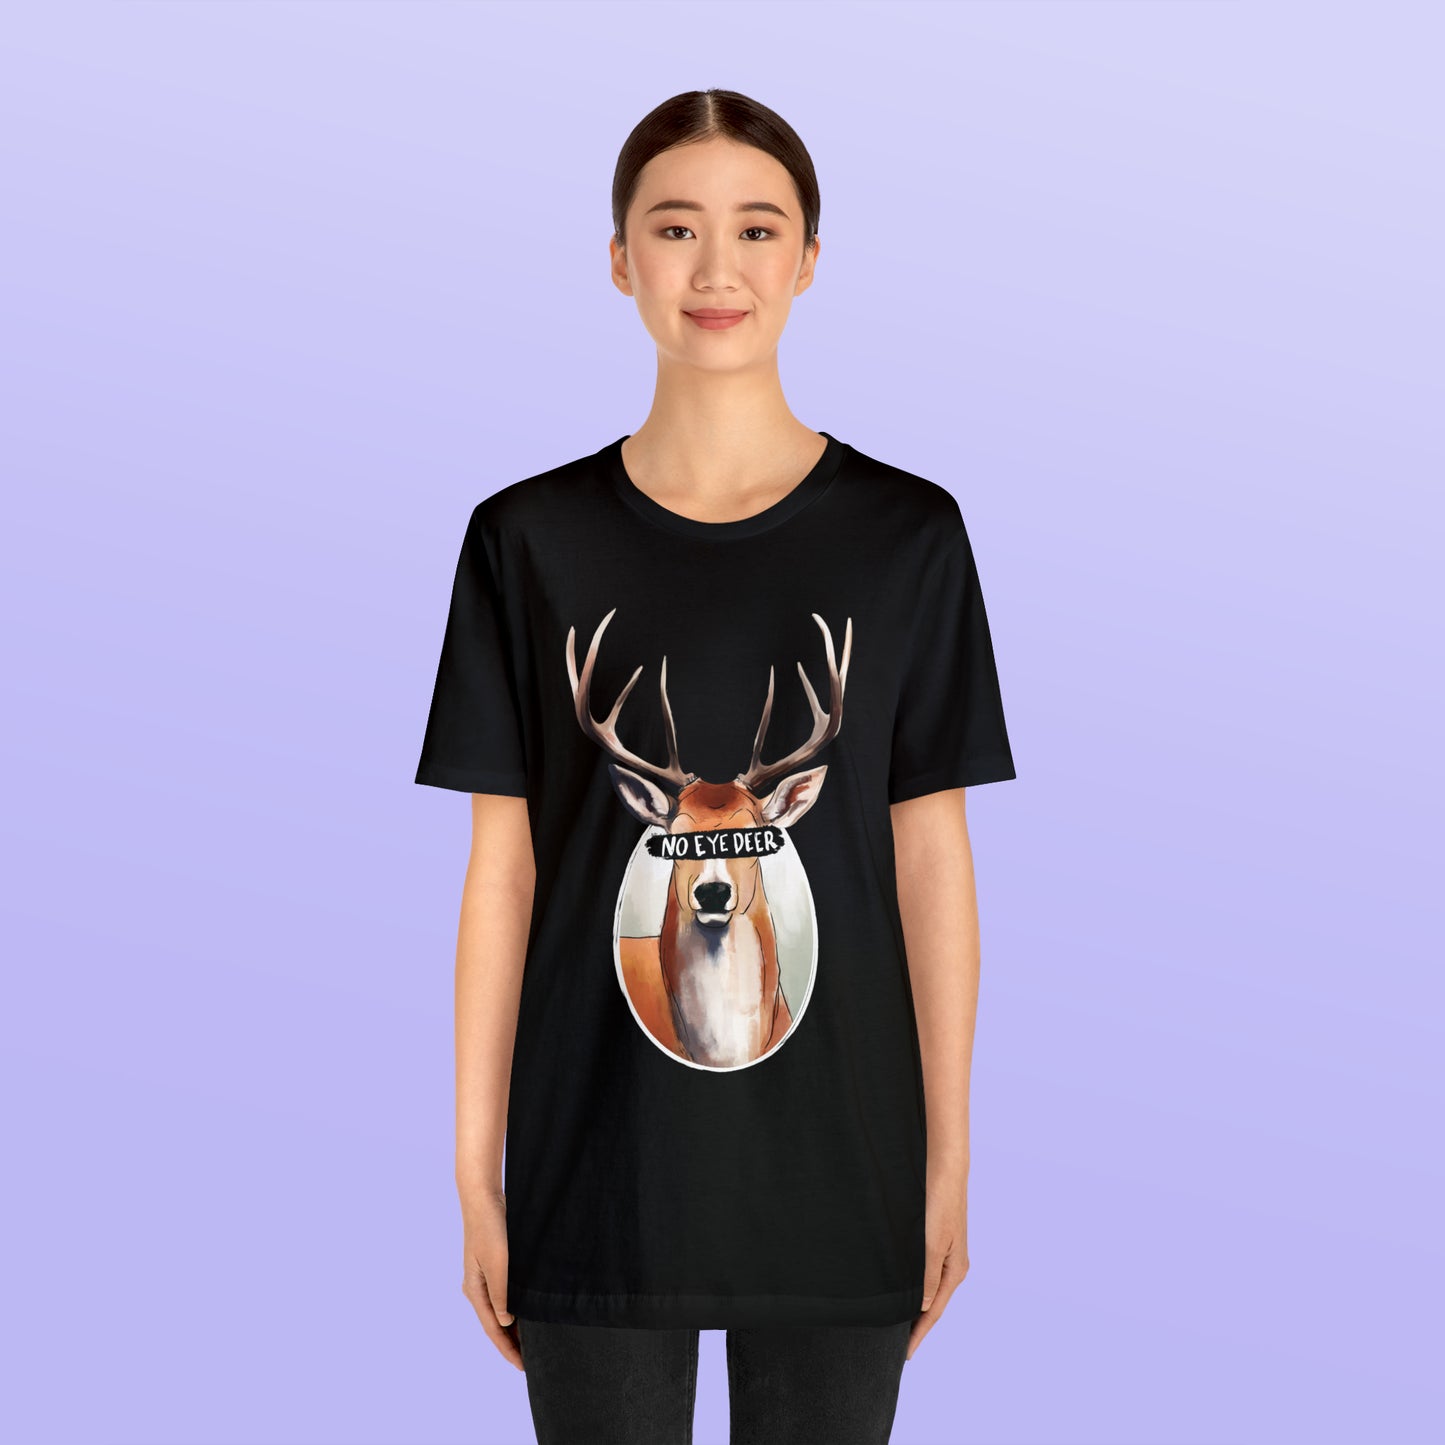 What do you call a deer with no eyes? Shirt